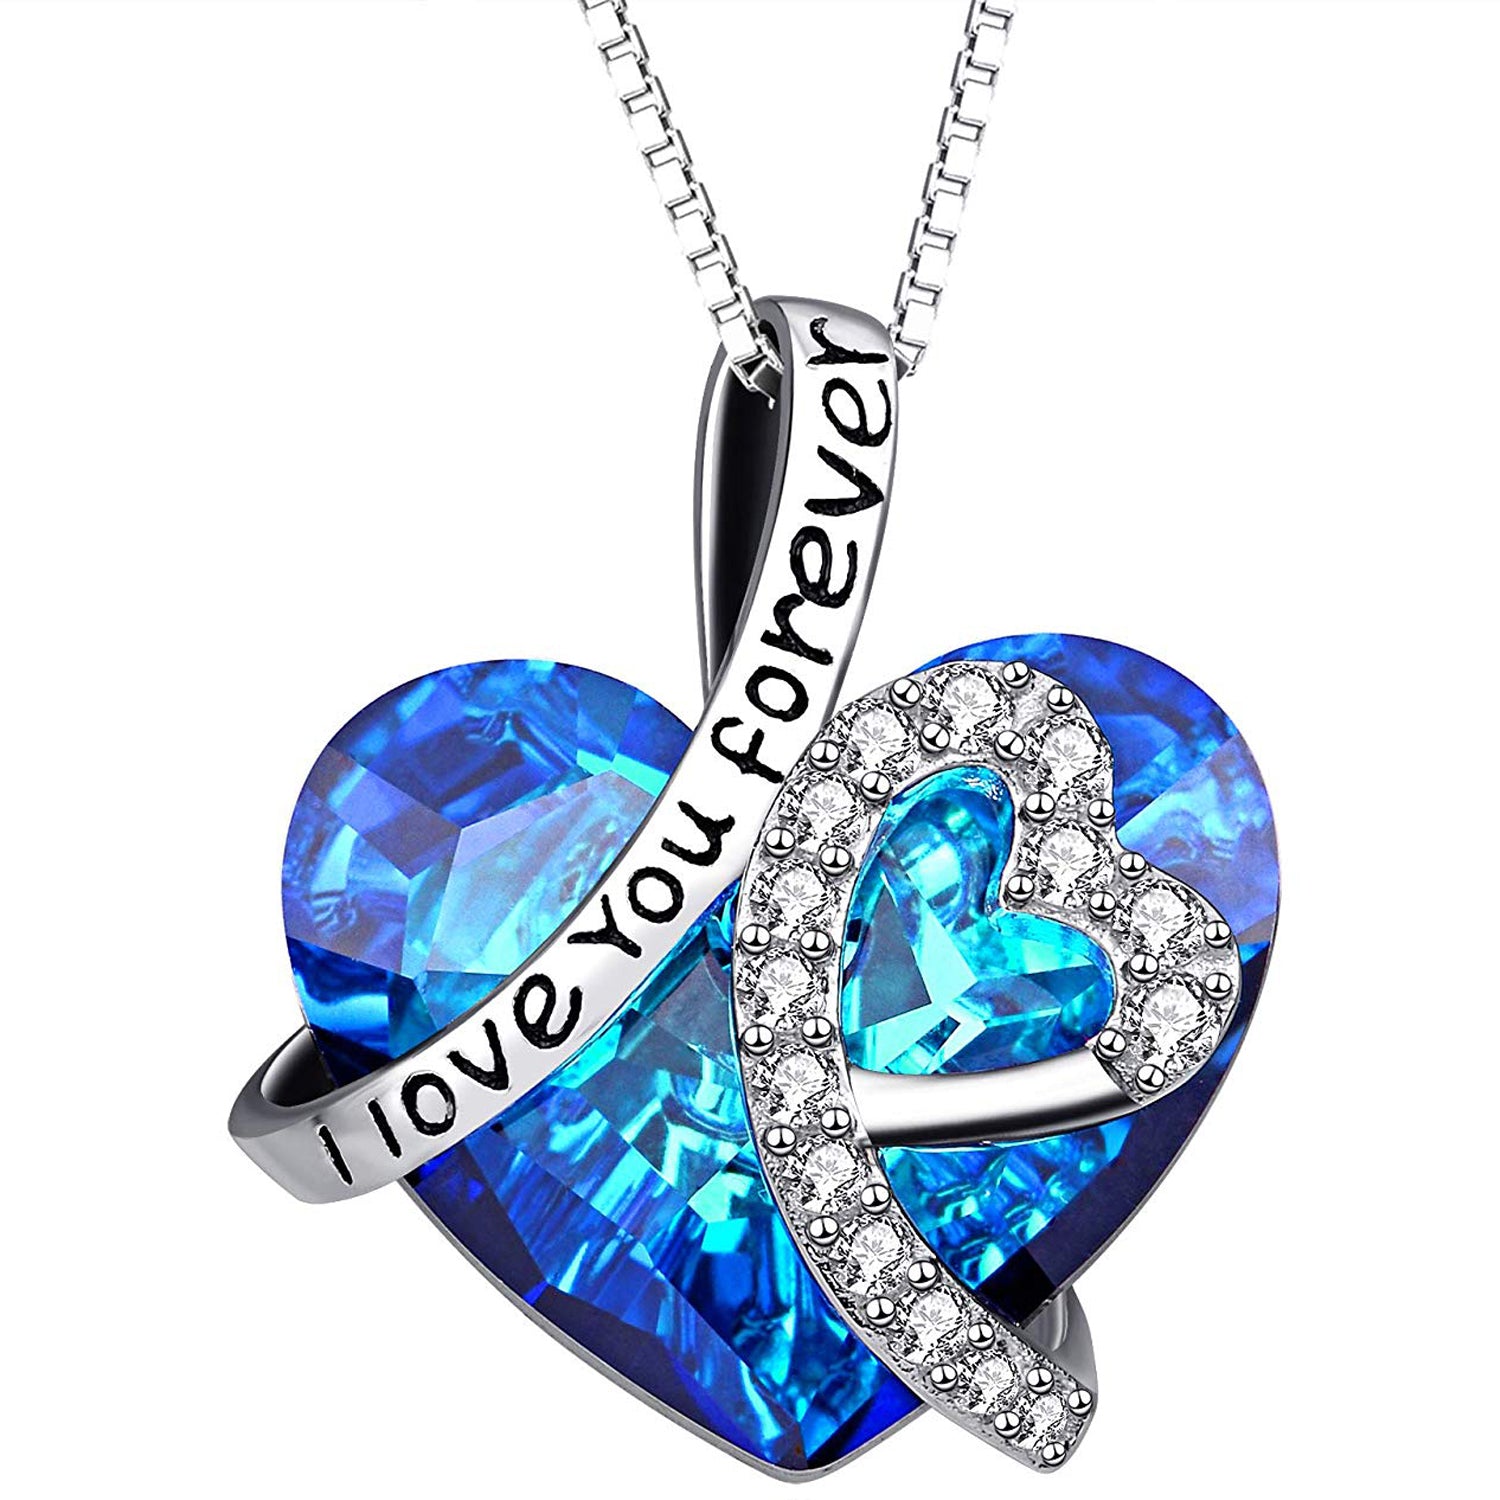 I Loe You Foreer Blue With Crystals Heart Necklacein 18k White Gold Filled